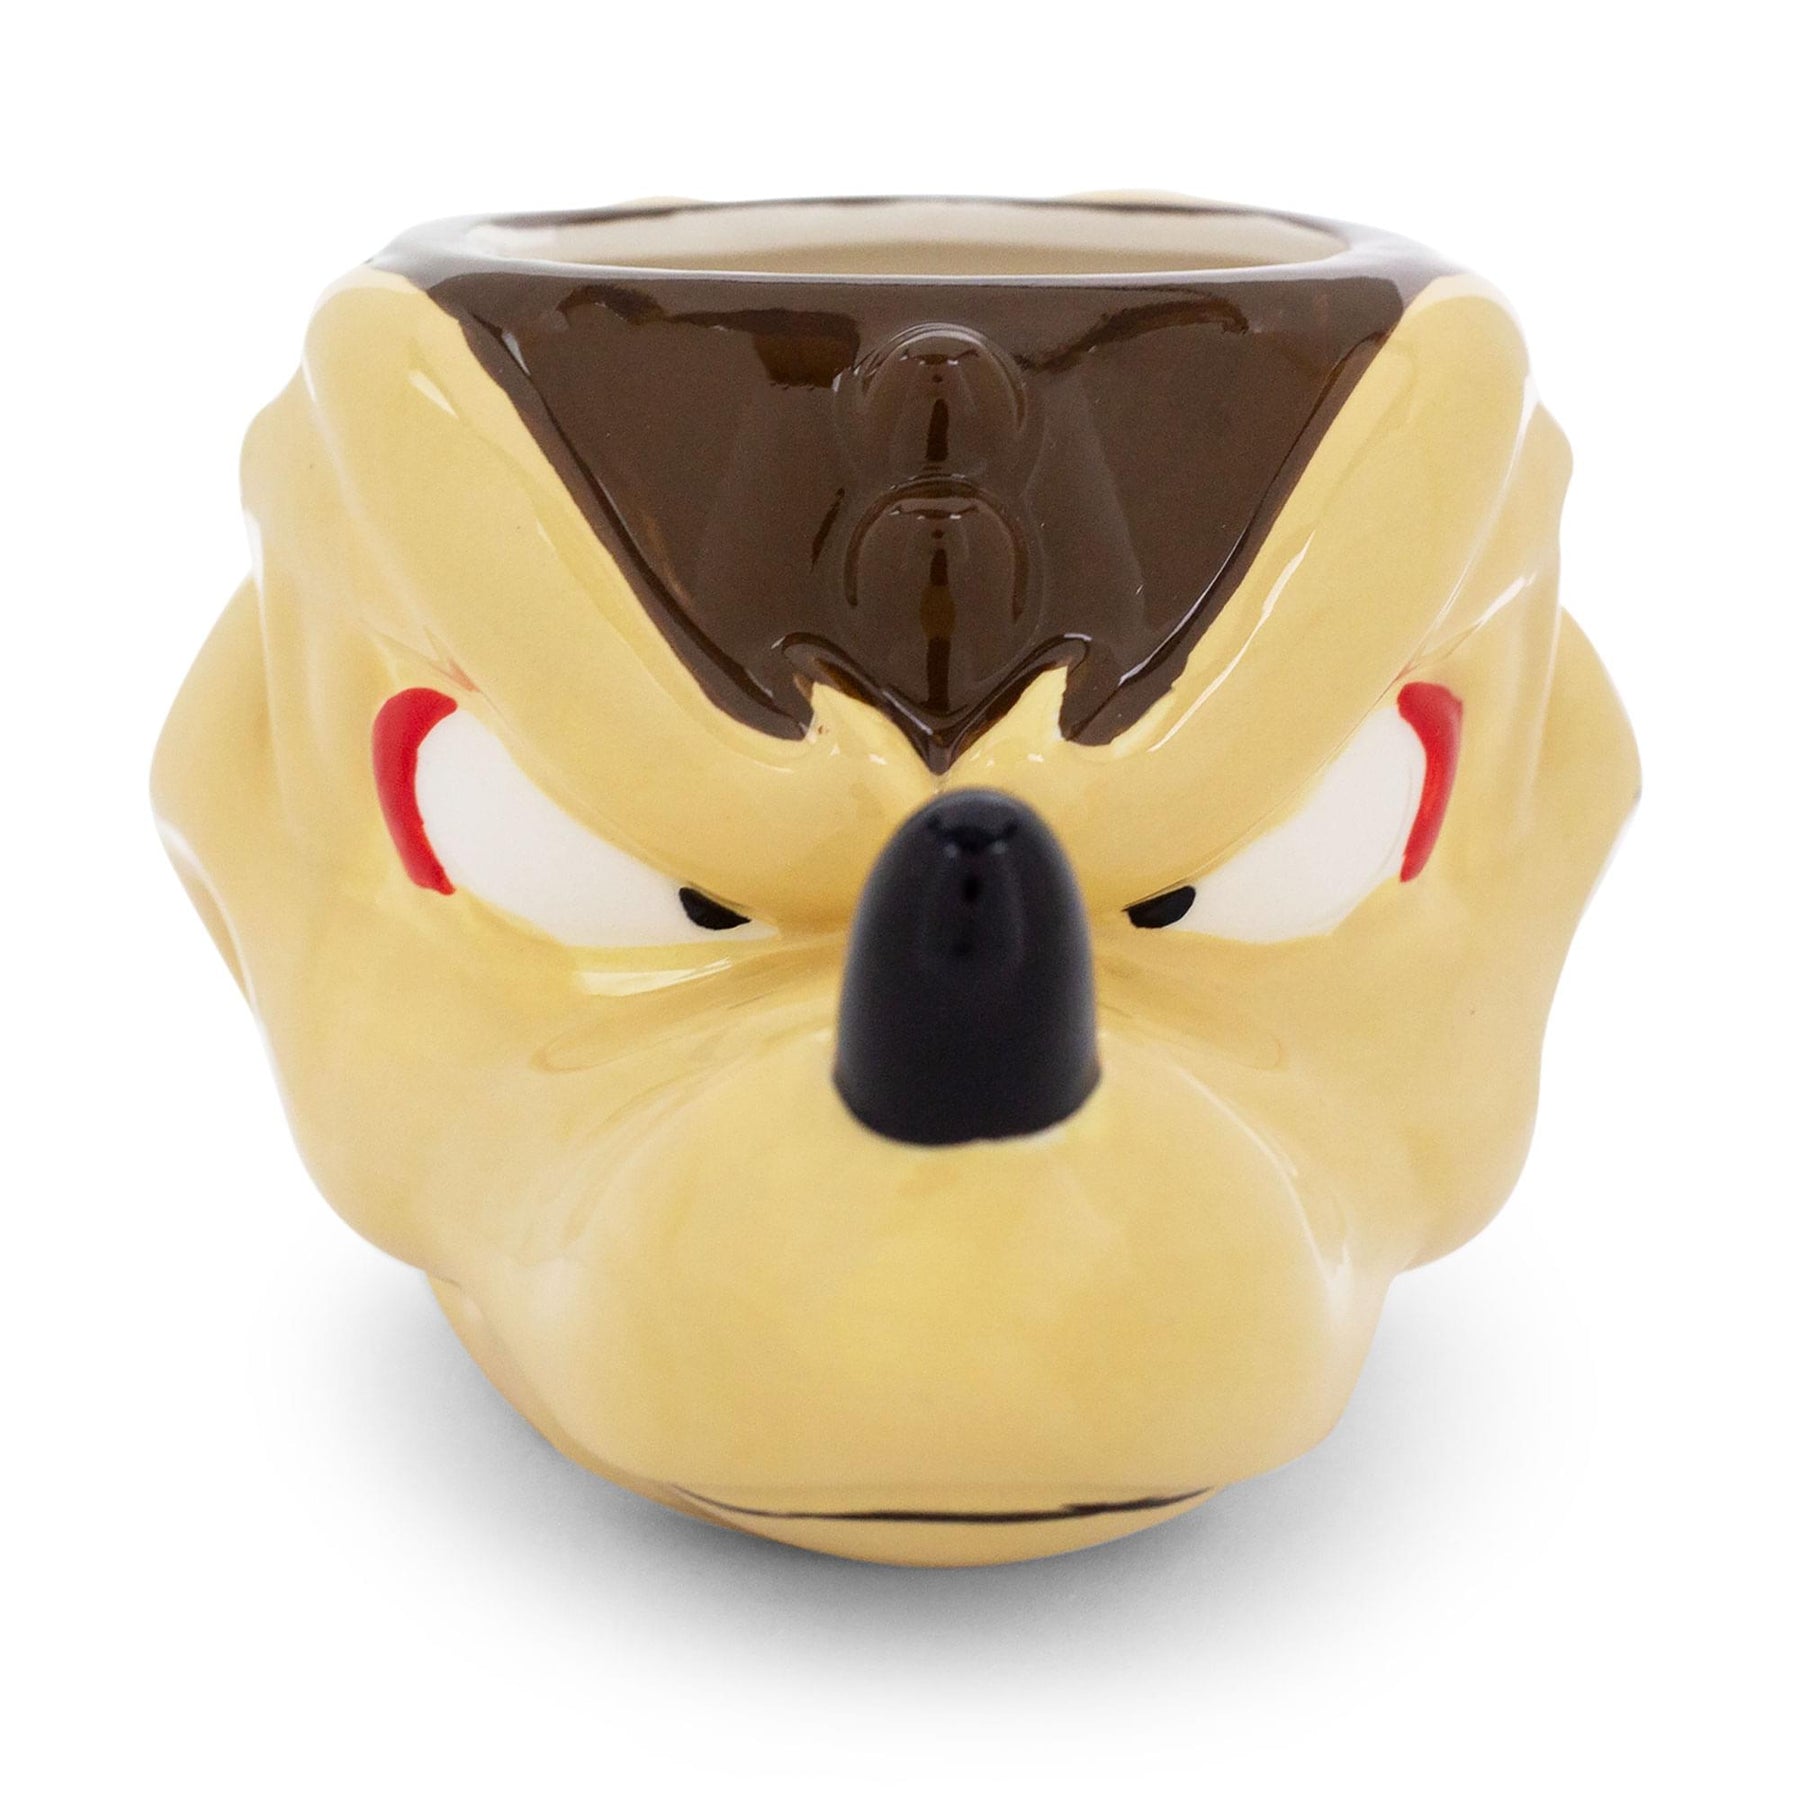 Looney Tunes Wile E. Coyote Sculpted Ceramic Mug | Holds 20 Ounces